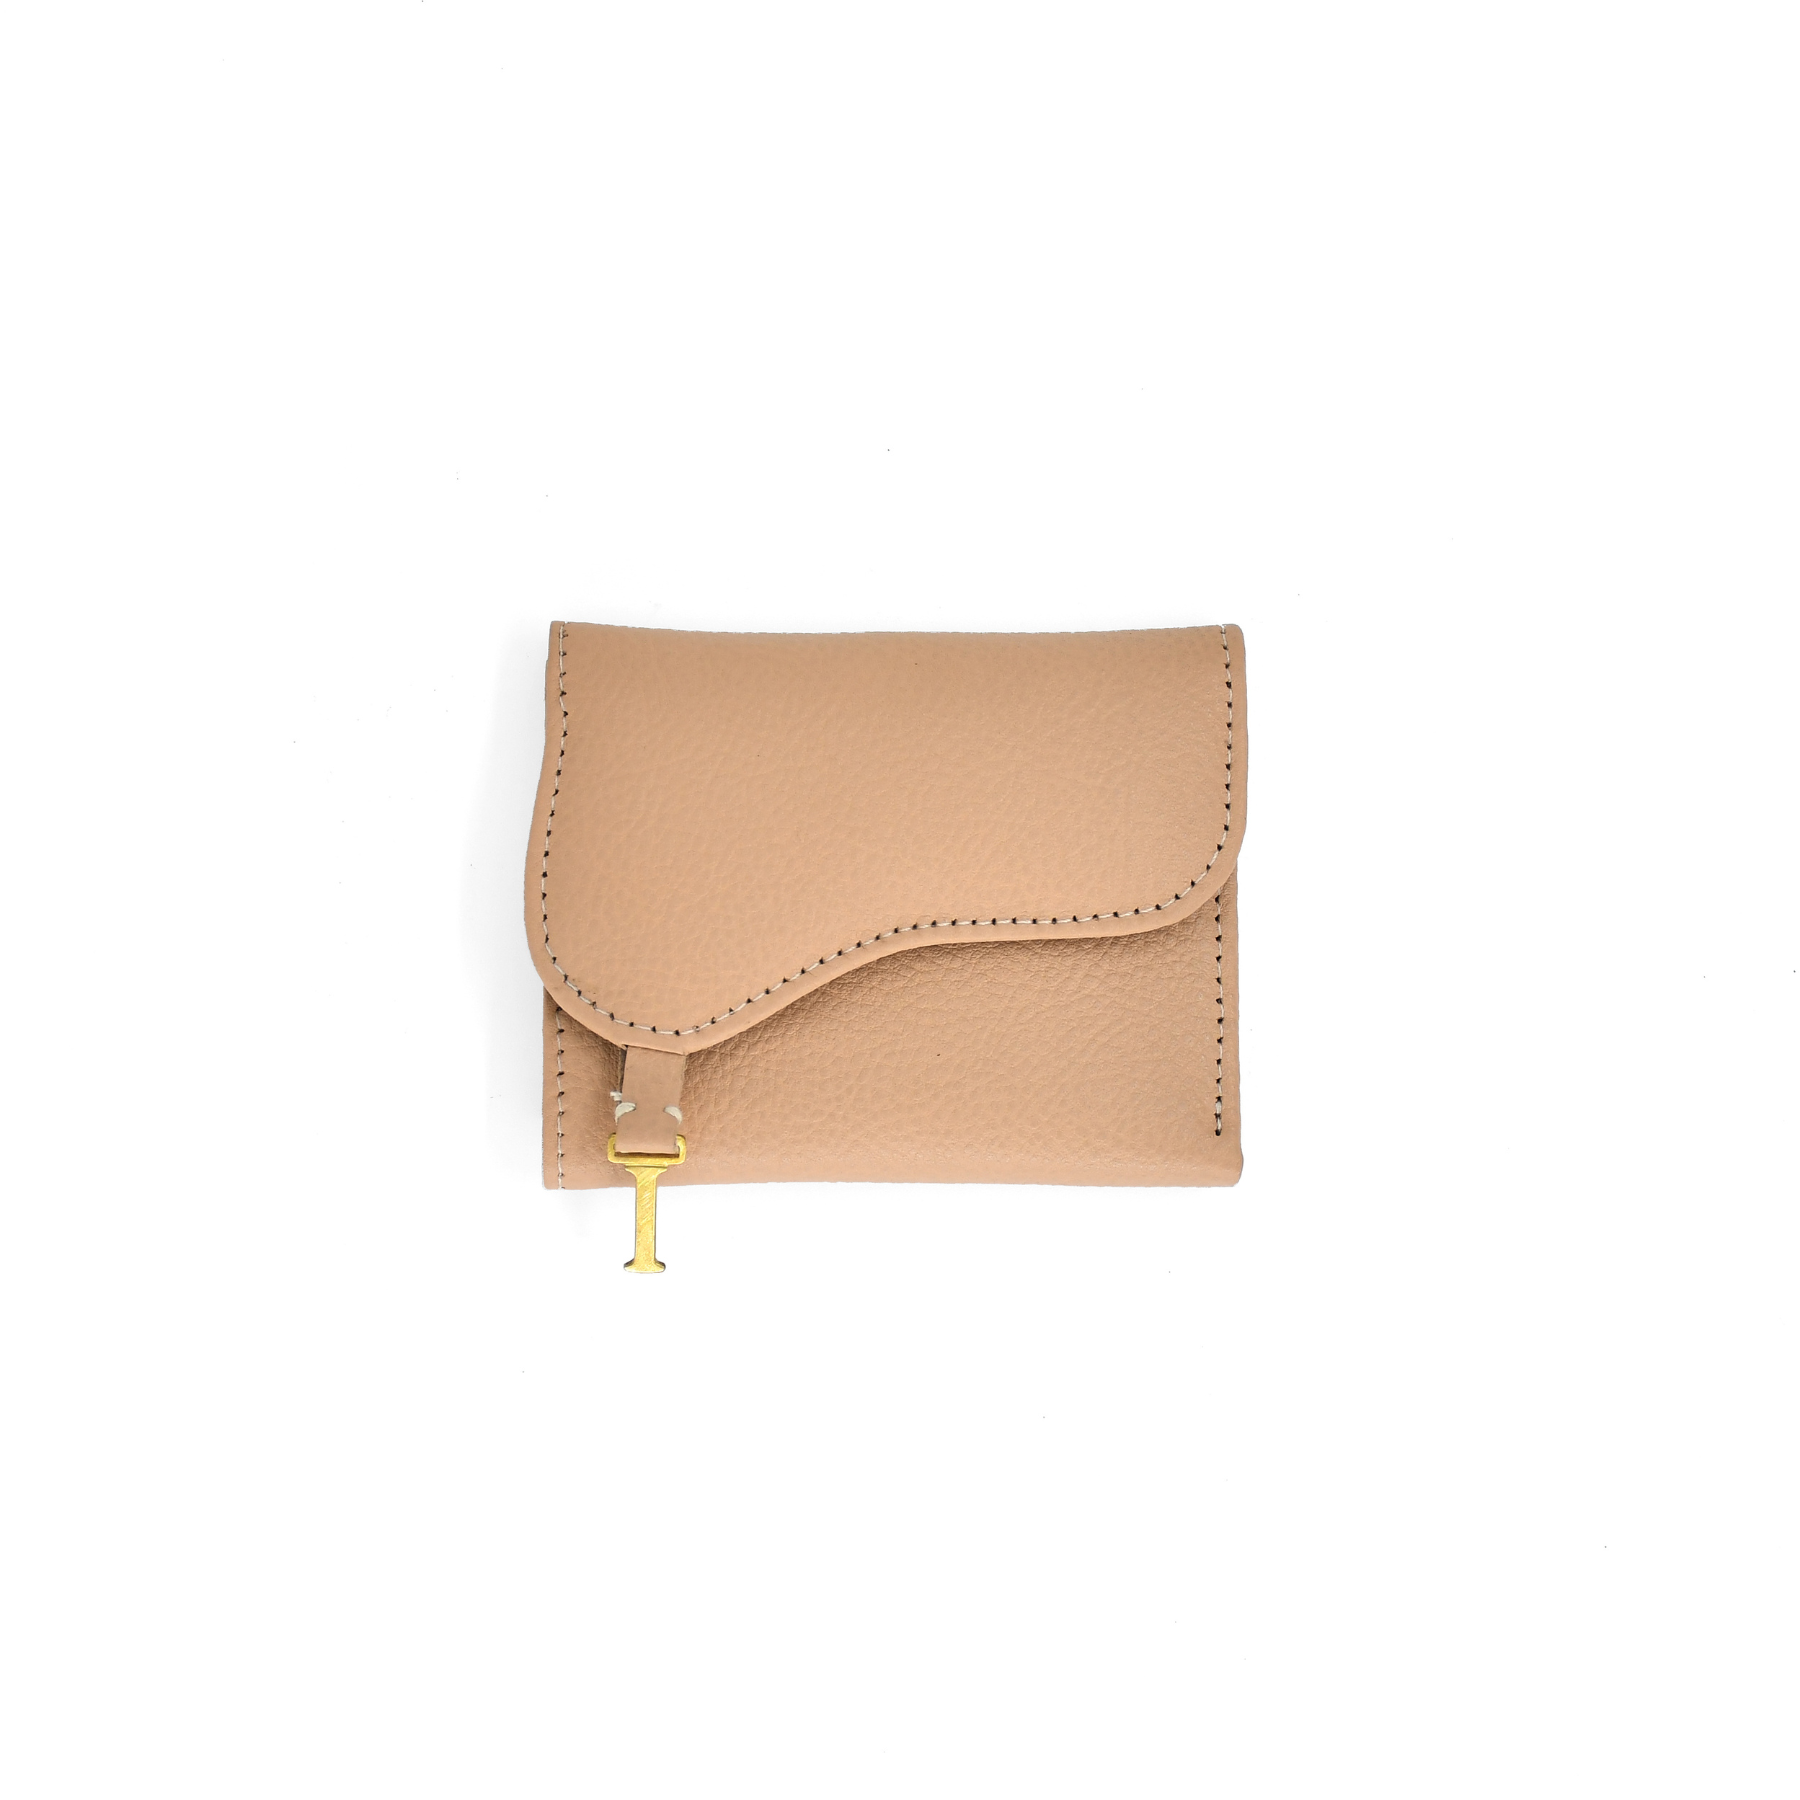 Gaucholife Nude Leather Wallet